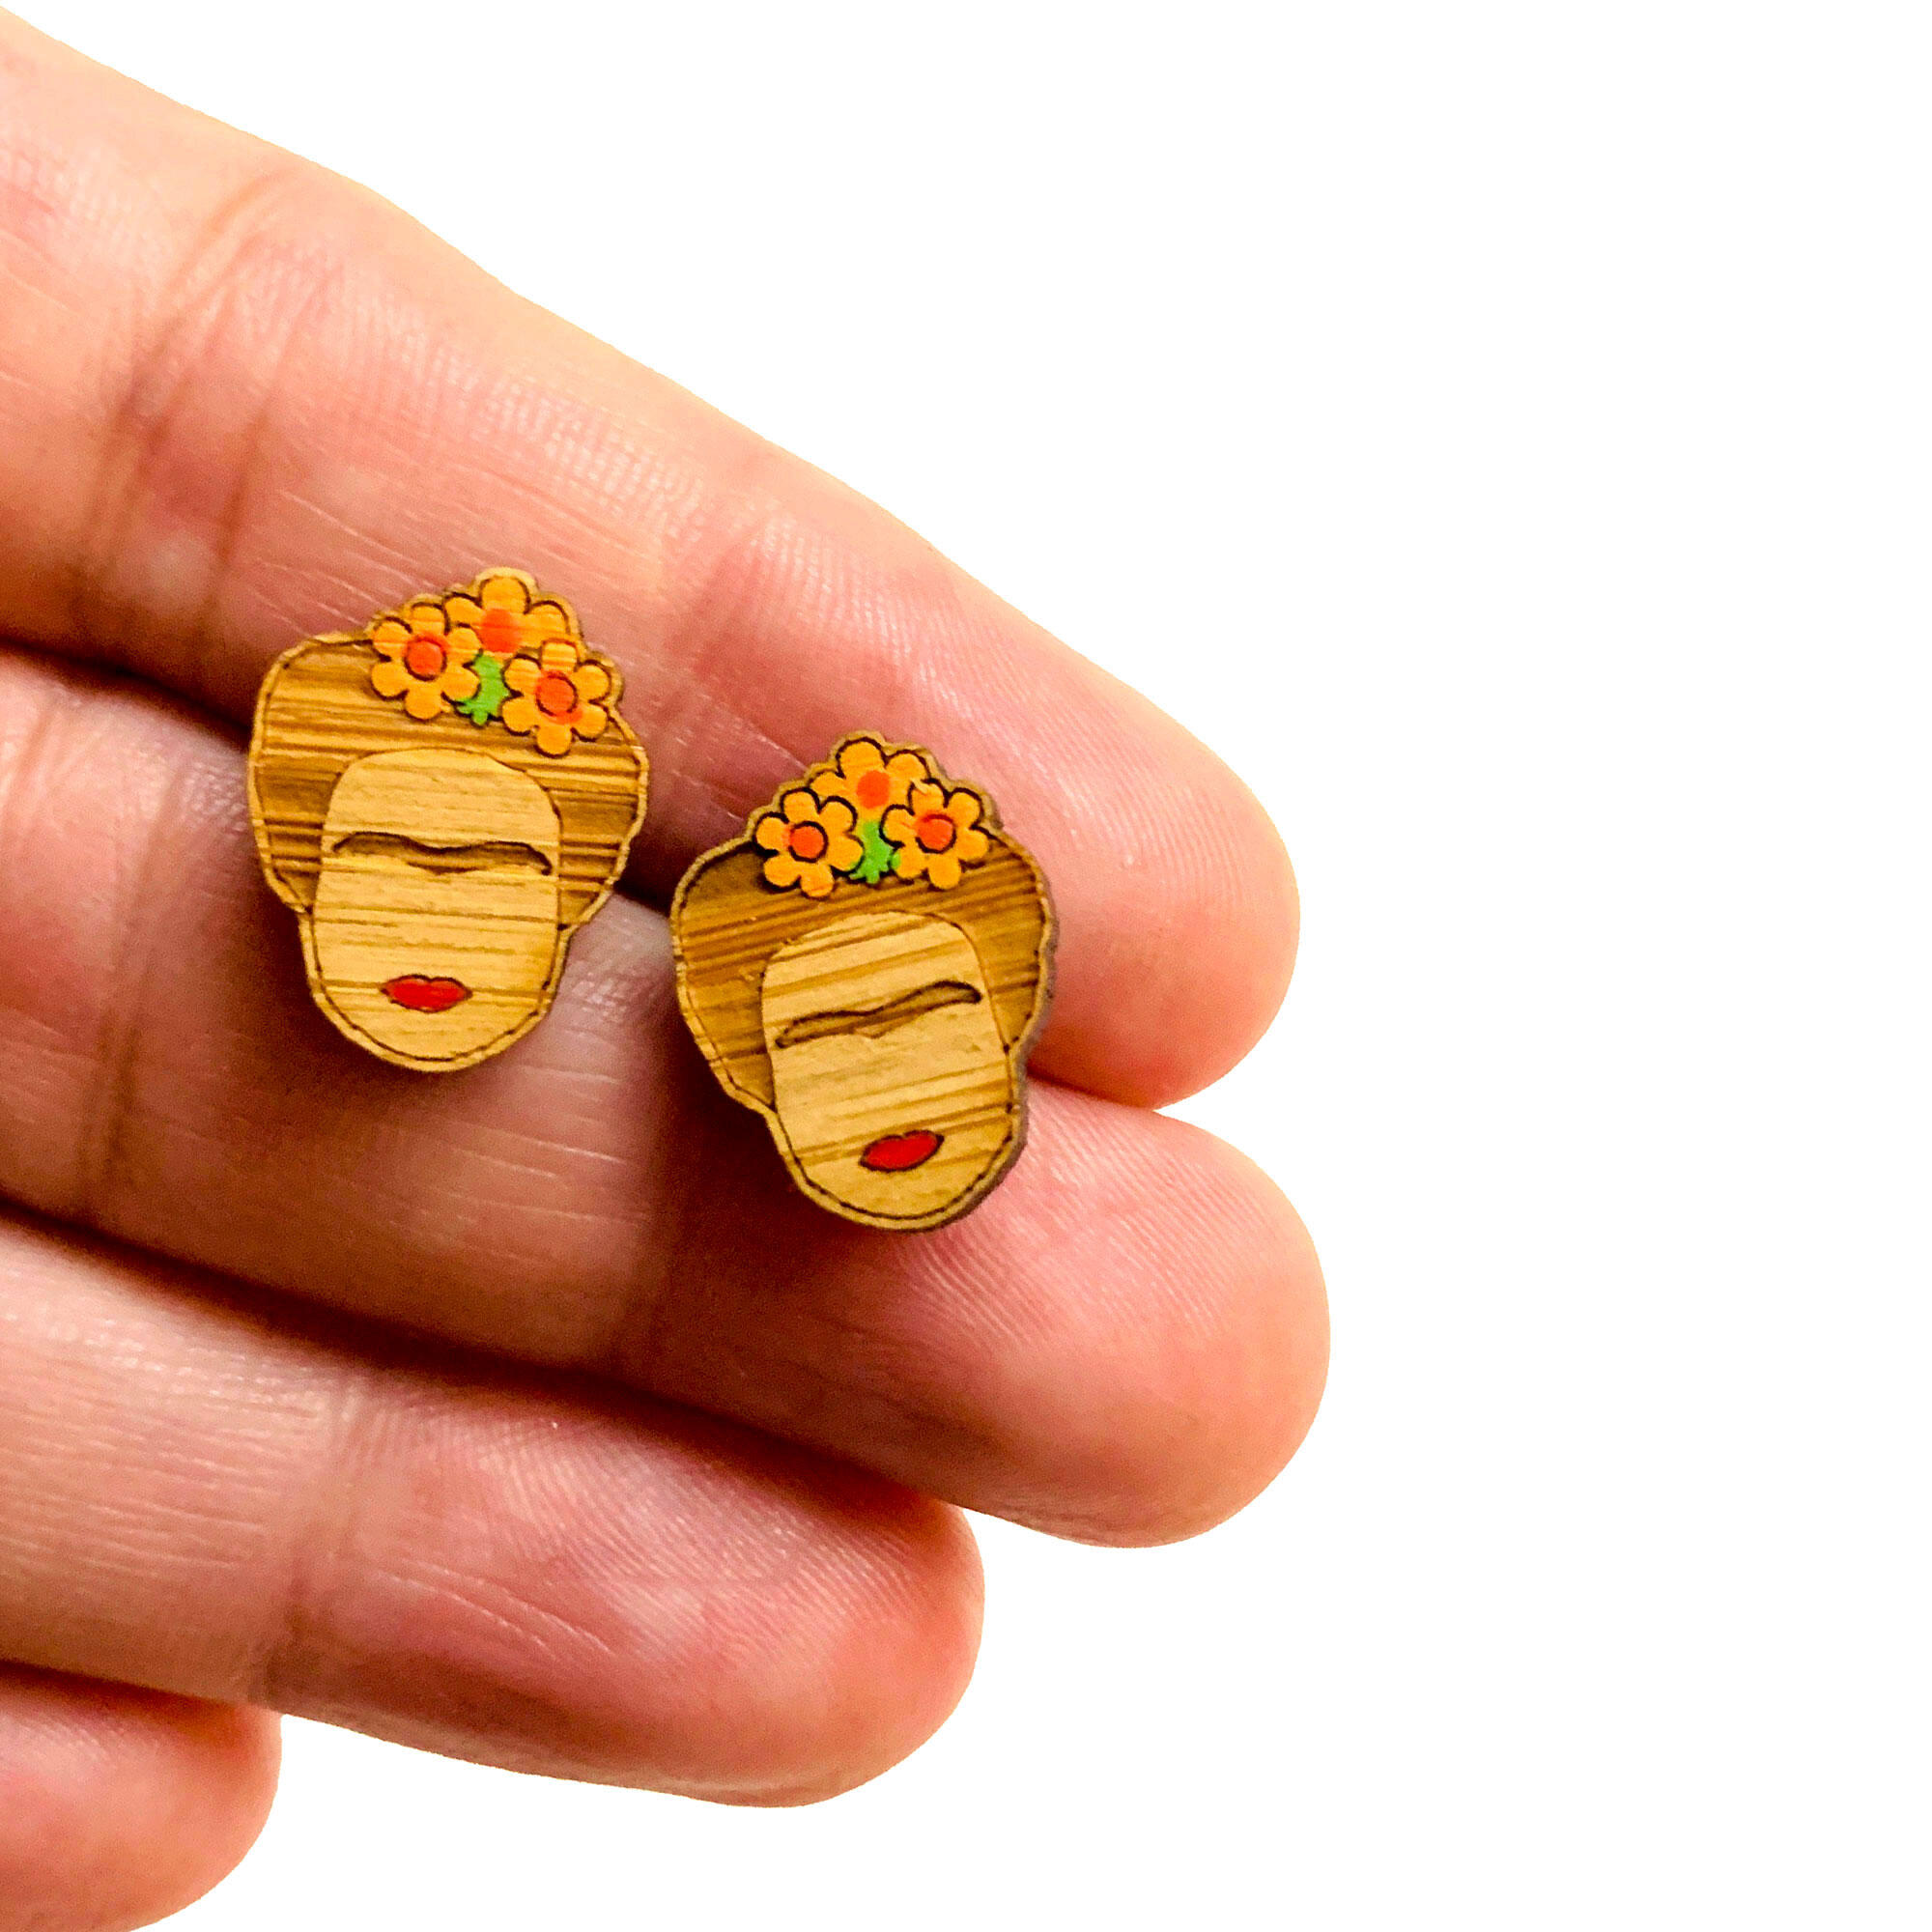 Minimalist jewelry earrings inspired by Frida Kahlo